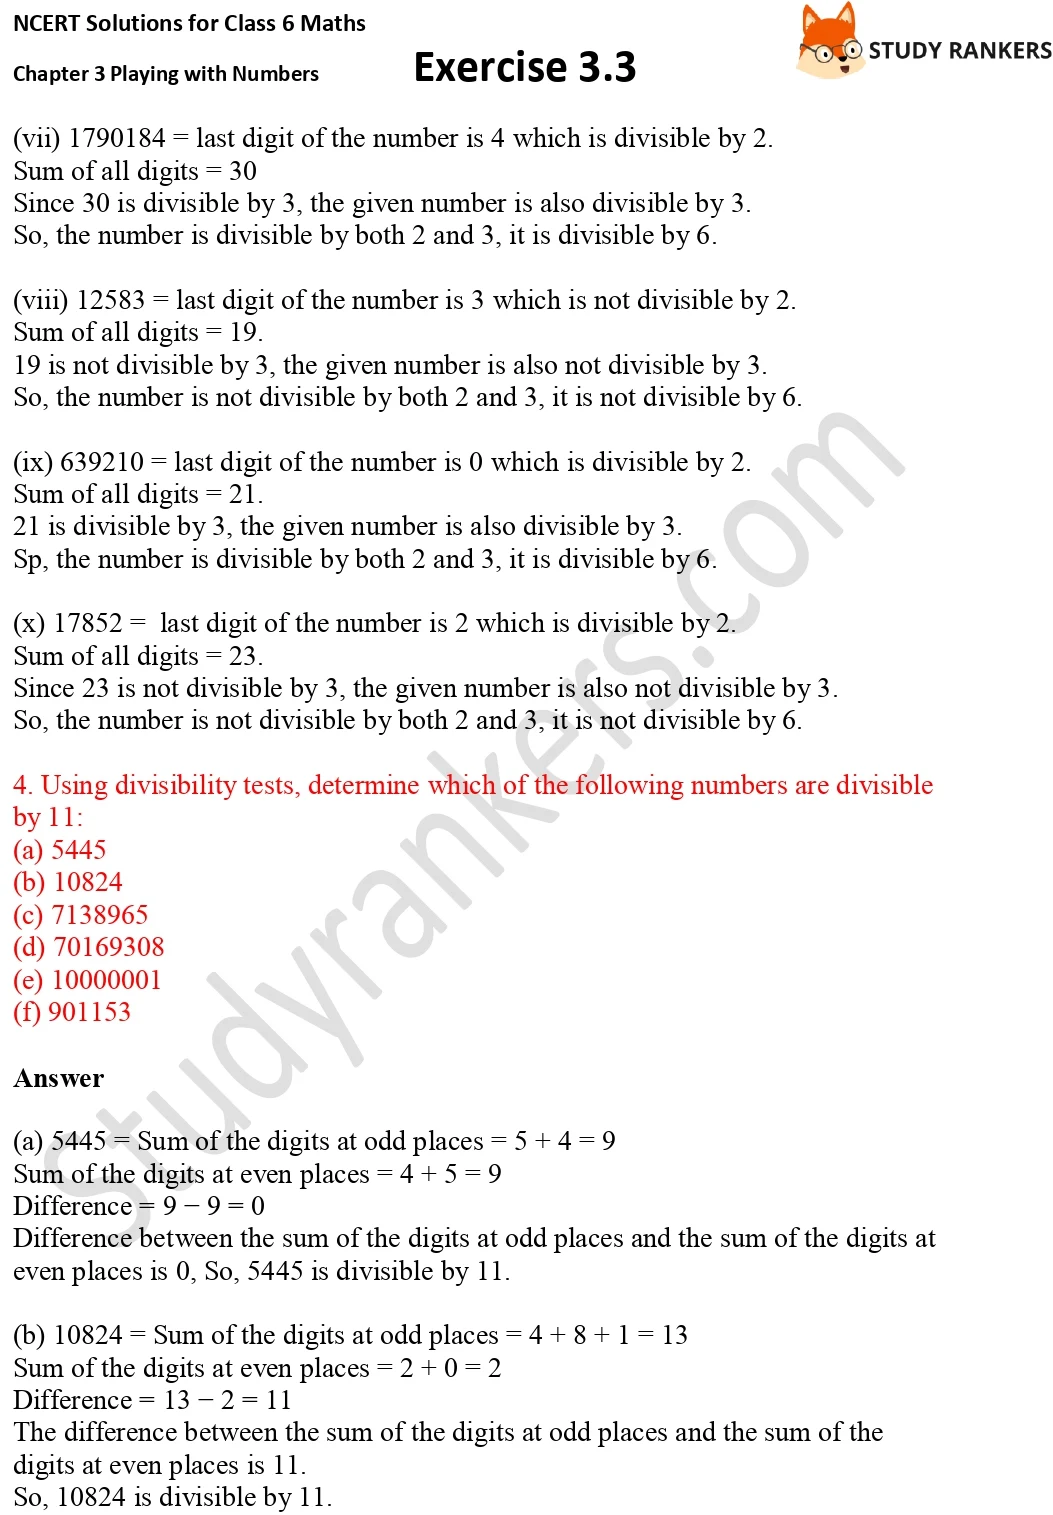 NCERT Solutions for Class 6 Maths Chapter 3 Playing with Numbers Exercise 3.3 Part 4